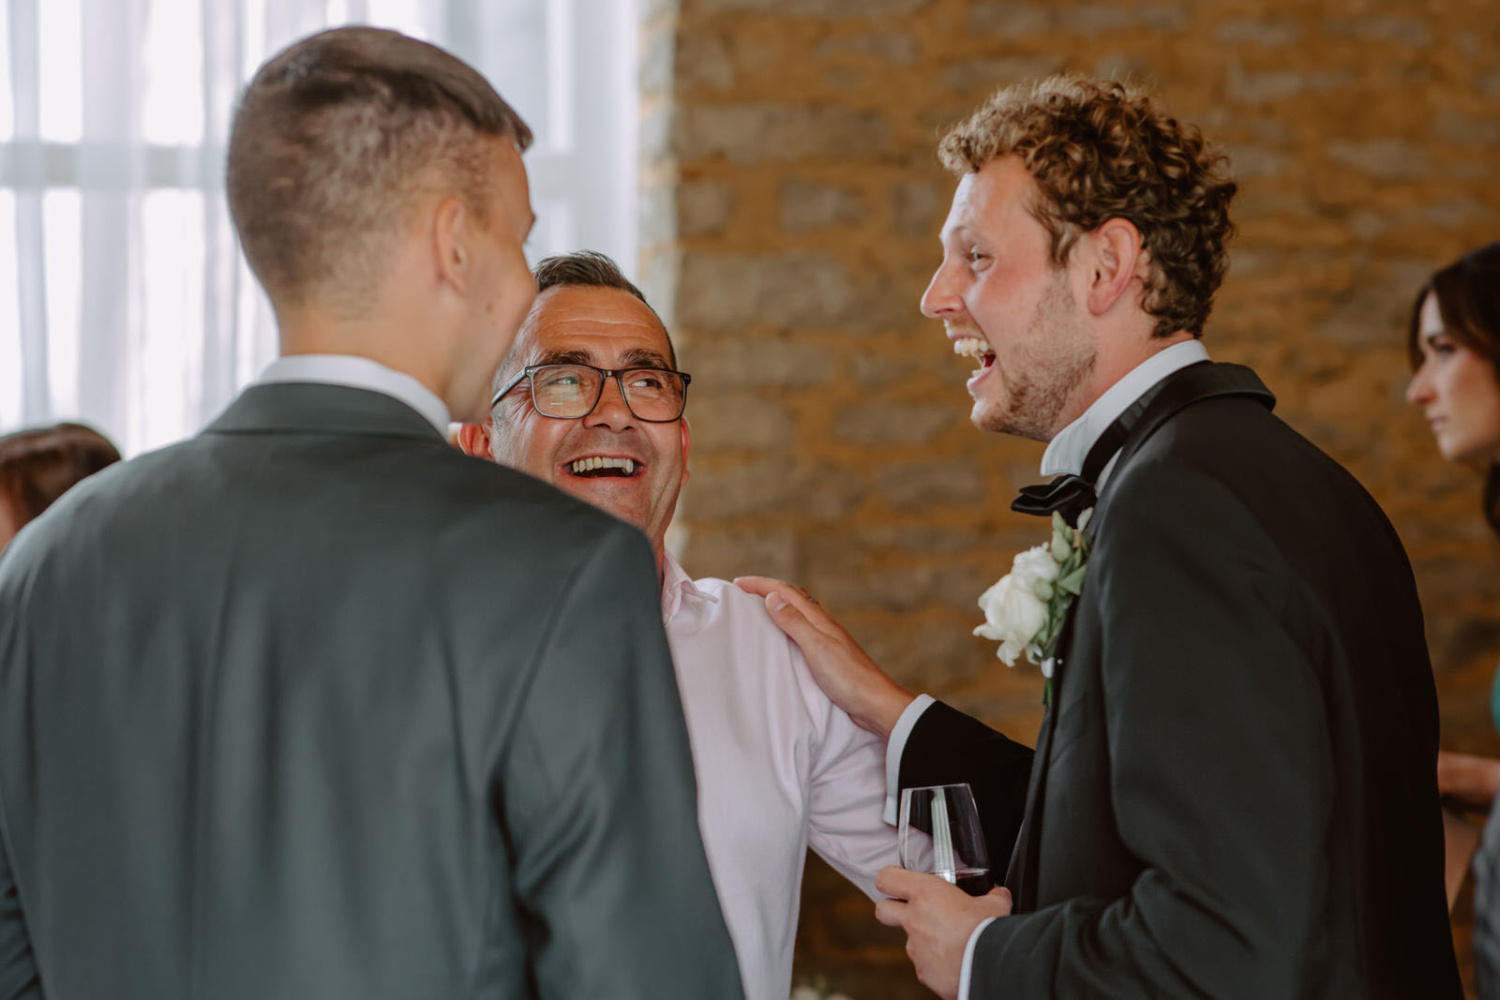 A group of men laughing at a wedding reception.